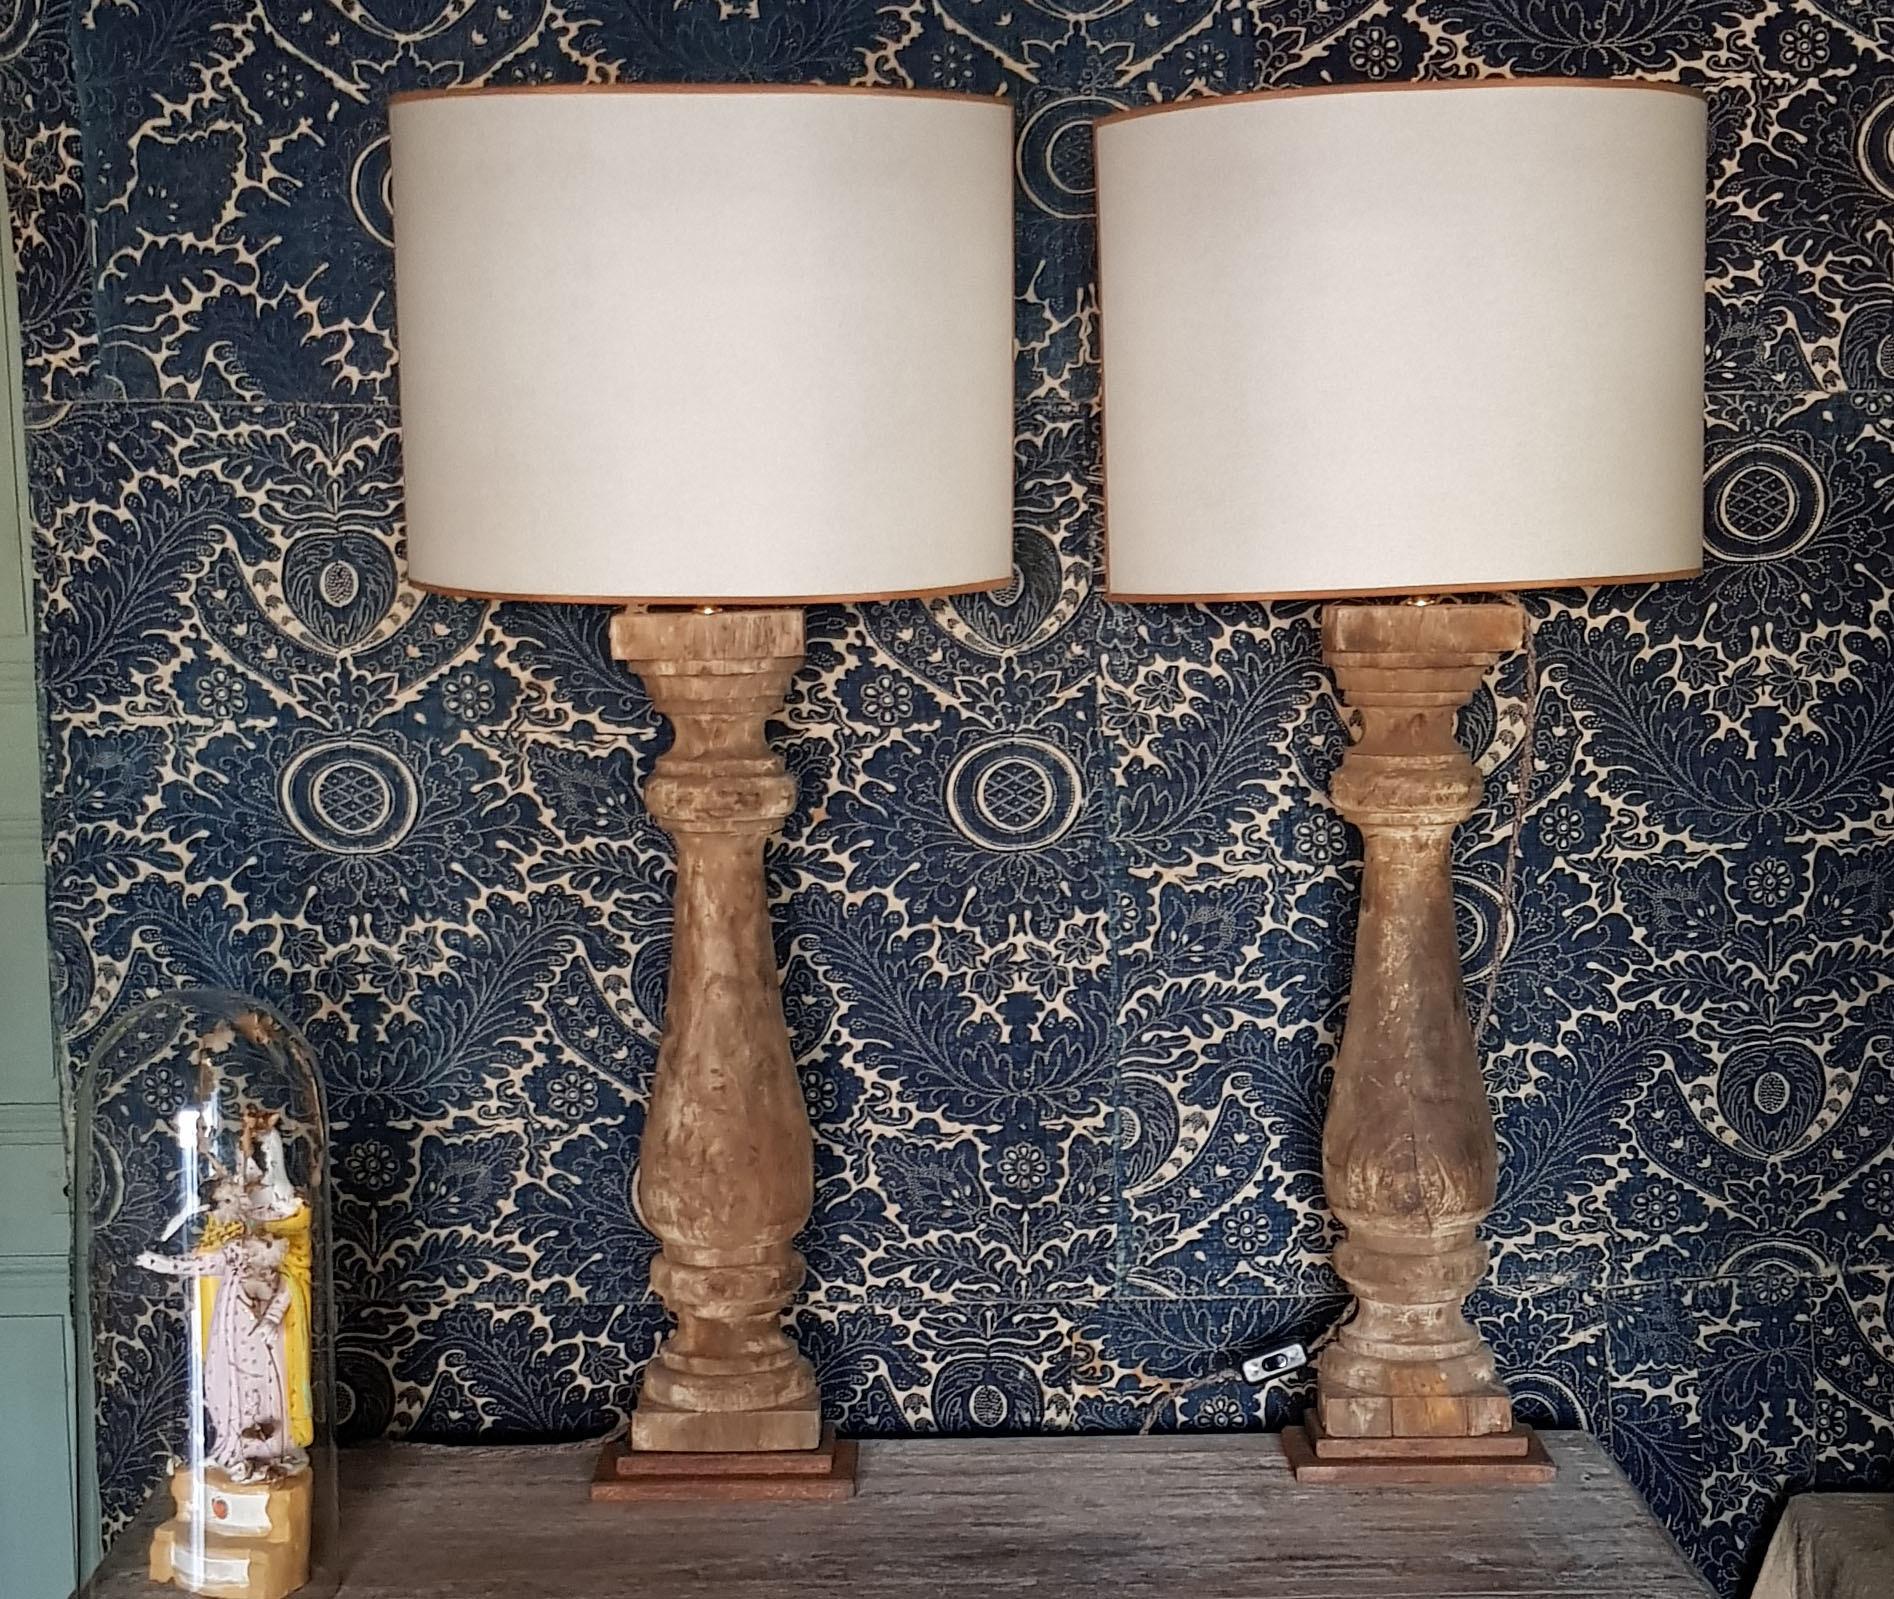 A stunning pair of tall 19th century French wood balustrade halves in original, aged patina converted to table lamps. The lamp bases are made of iron and the lamp shades parchment. Lovely French braided cords, newly electrified for use in the U.S. 